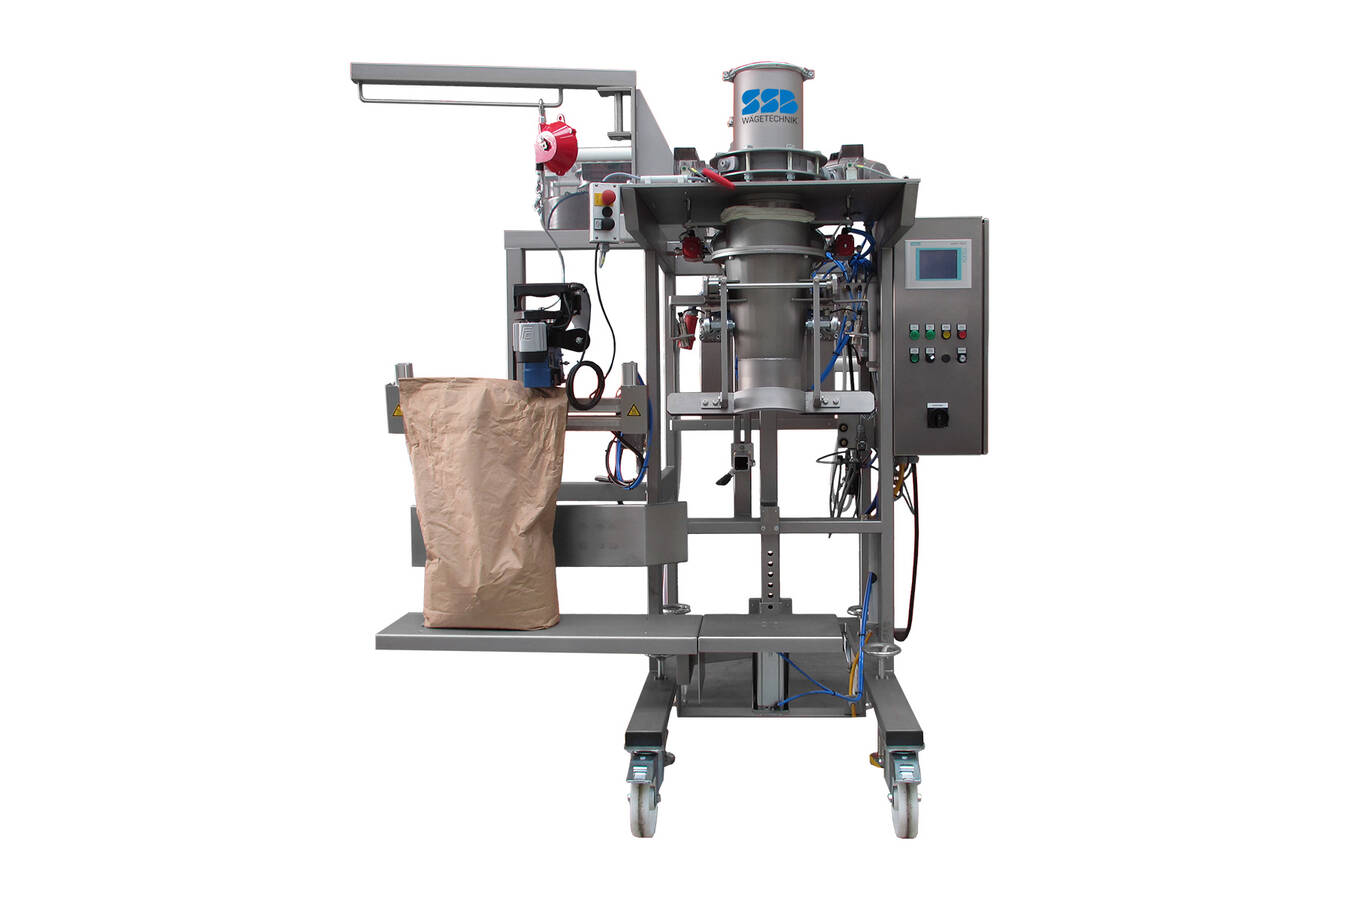 The Multifill BE-25 gross bagging scale; the universal talent The Multifill BE-25 gross bagging scale is a modular system for different packaging materials and different products.